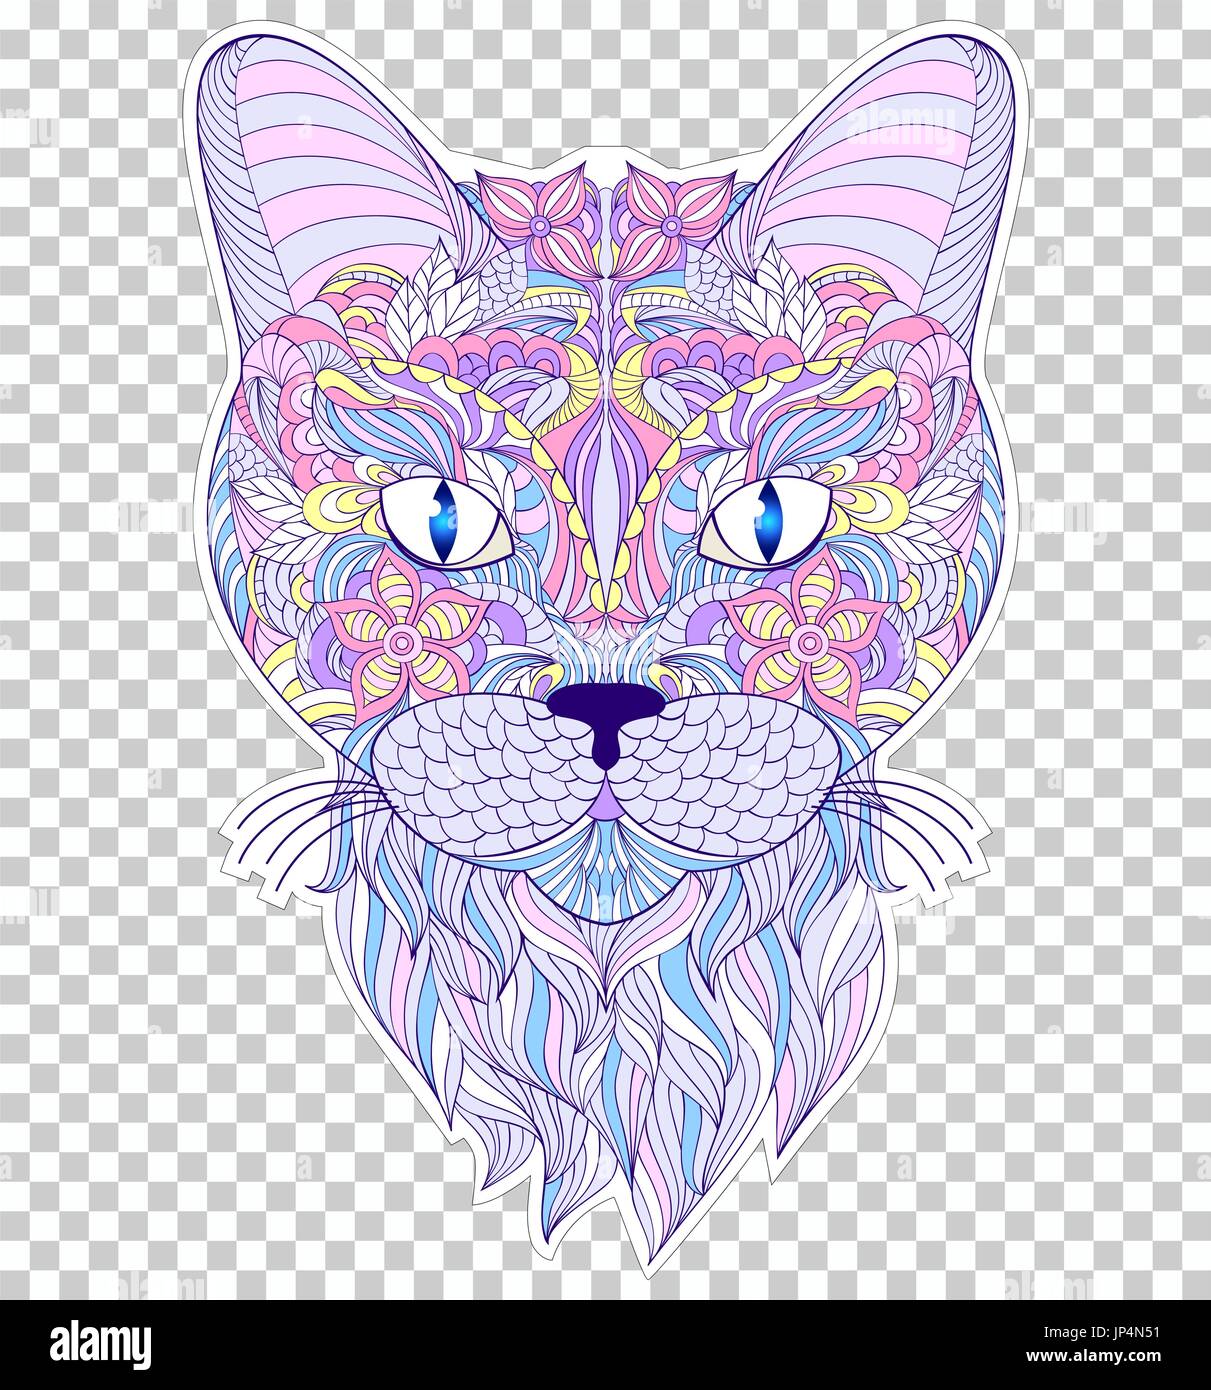 Colorful head of cat Stock Vector